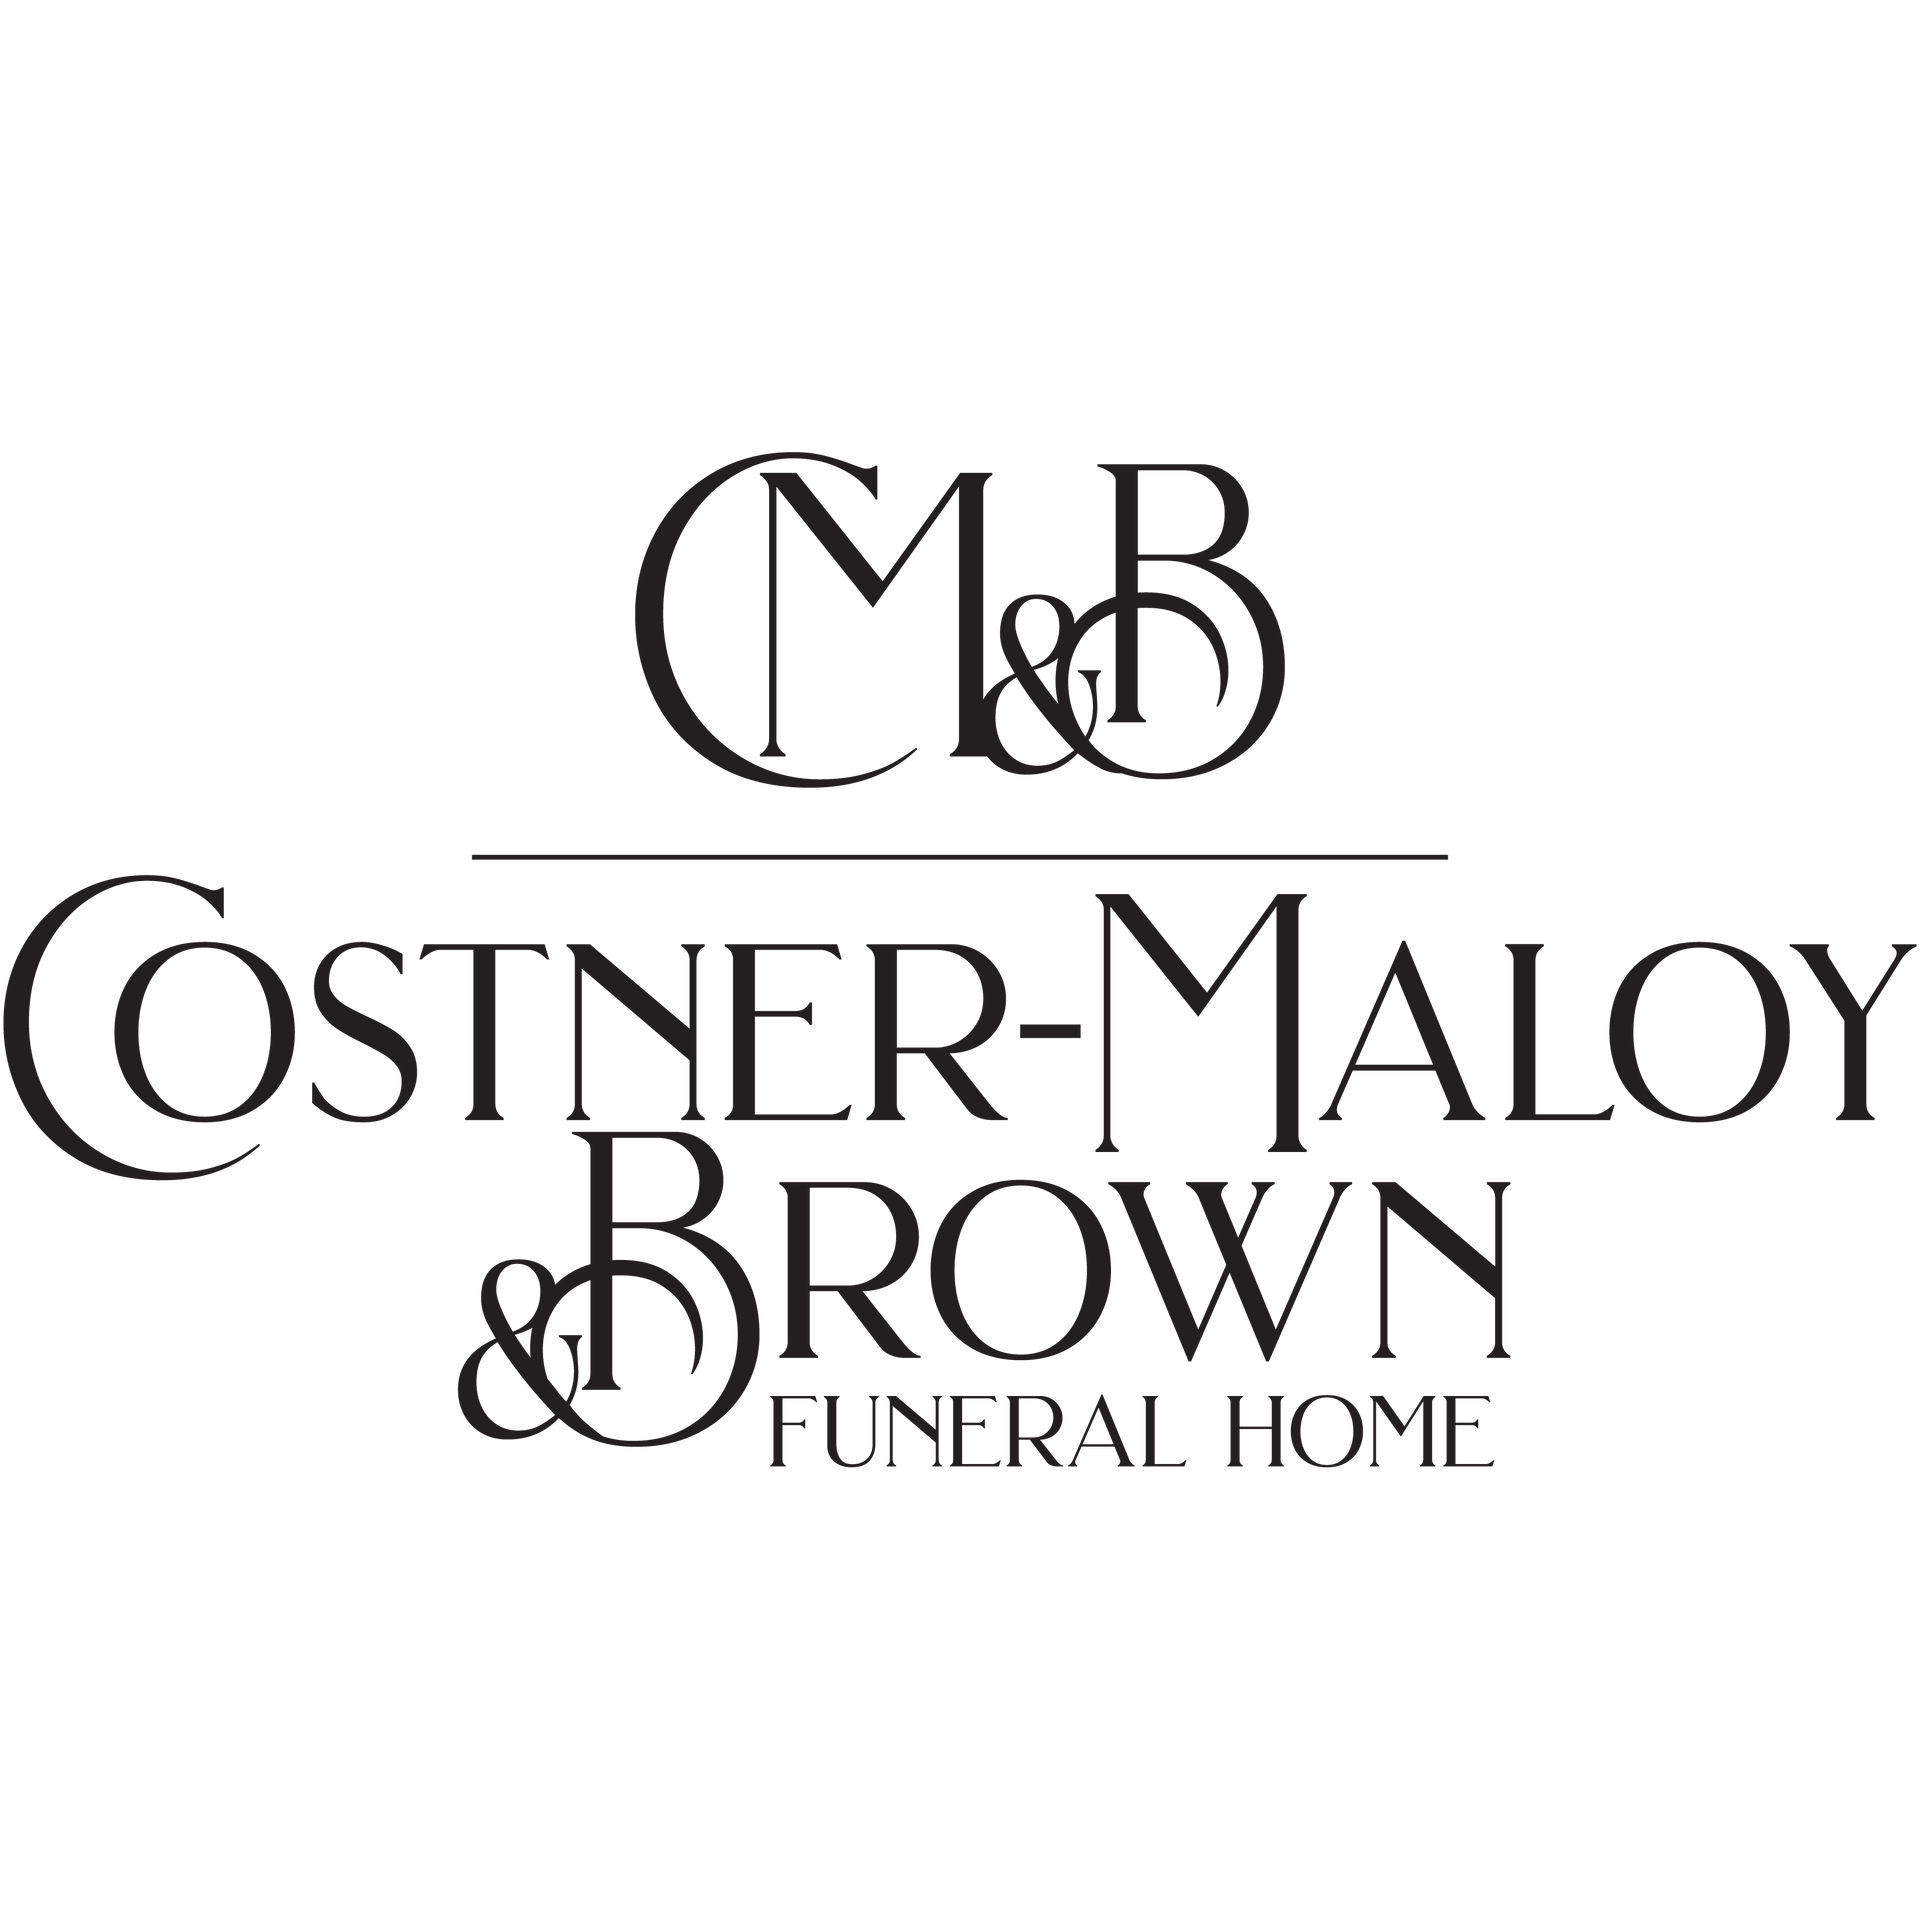 Costner-Malory & Brown Funeral Home Logo